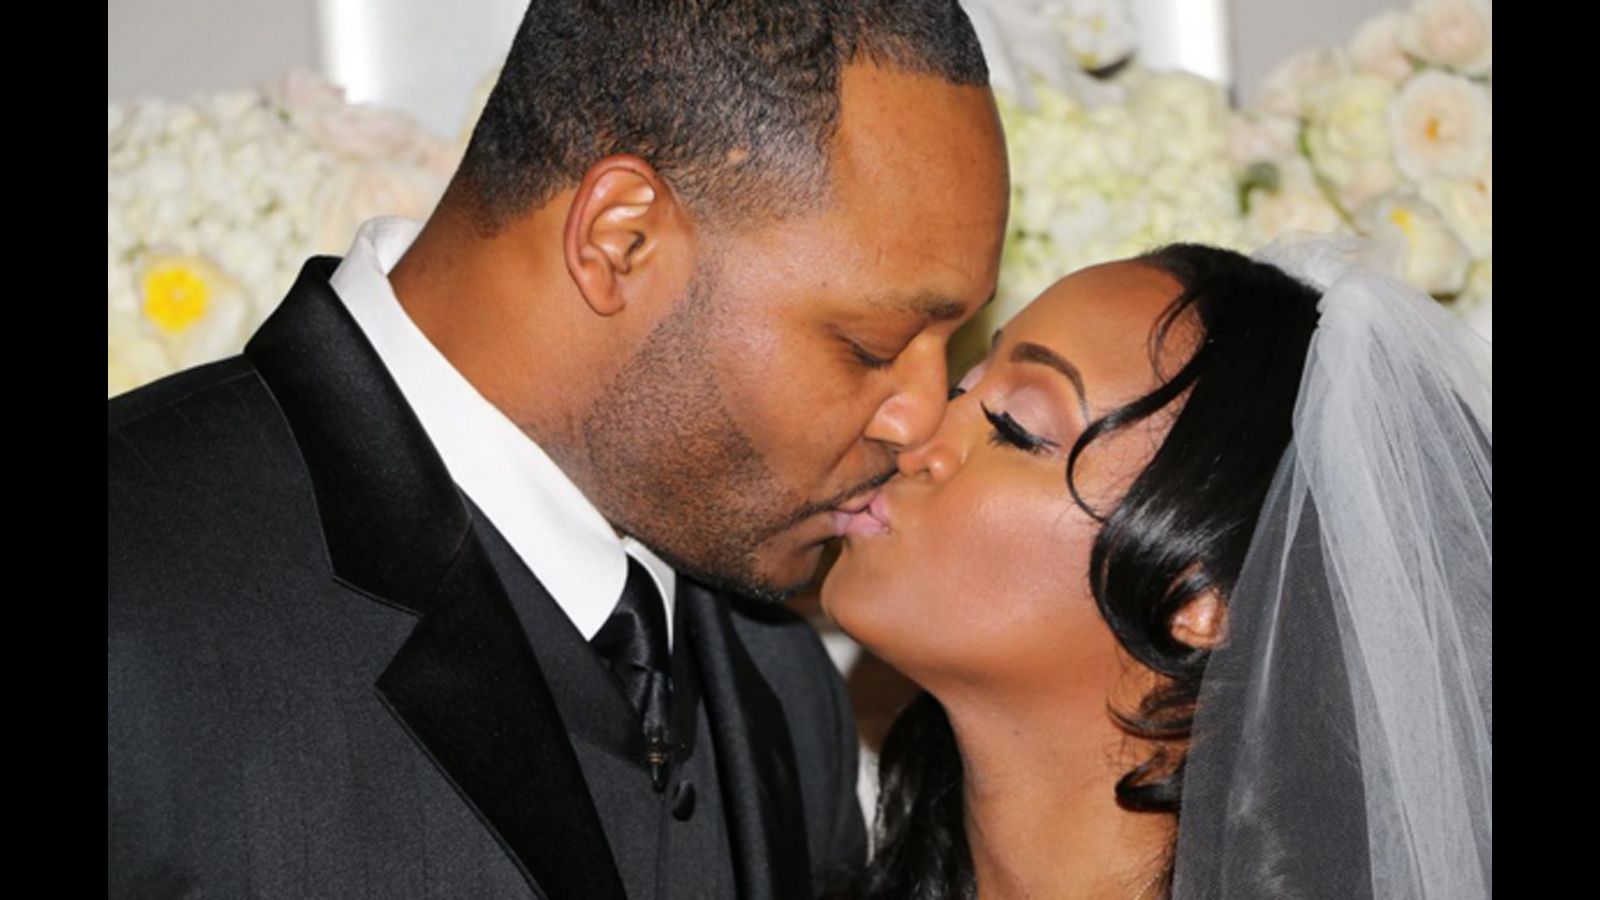 clifford holloway recommends keisha knight pulliam hot pic